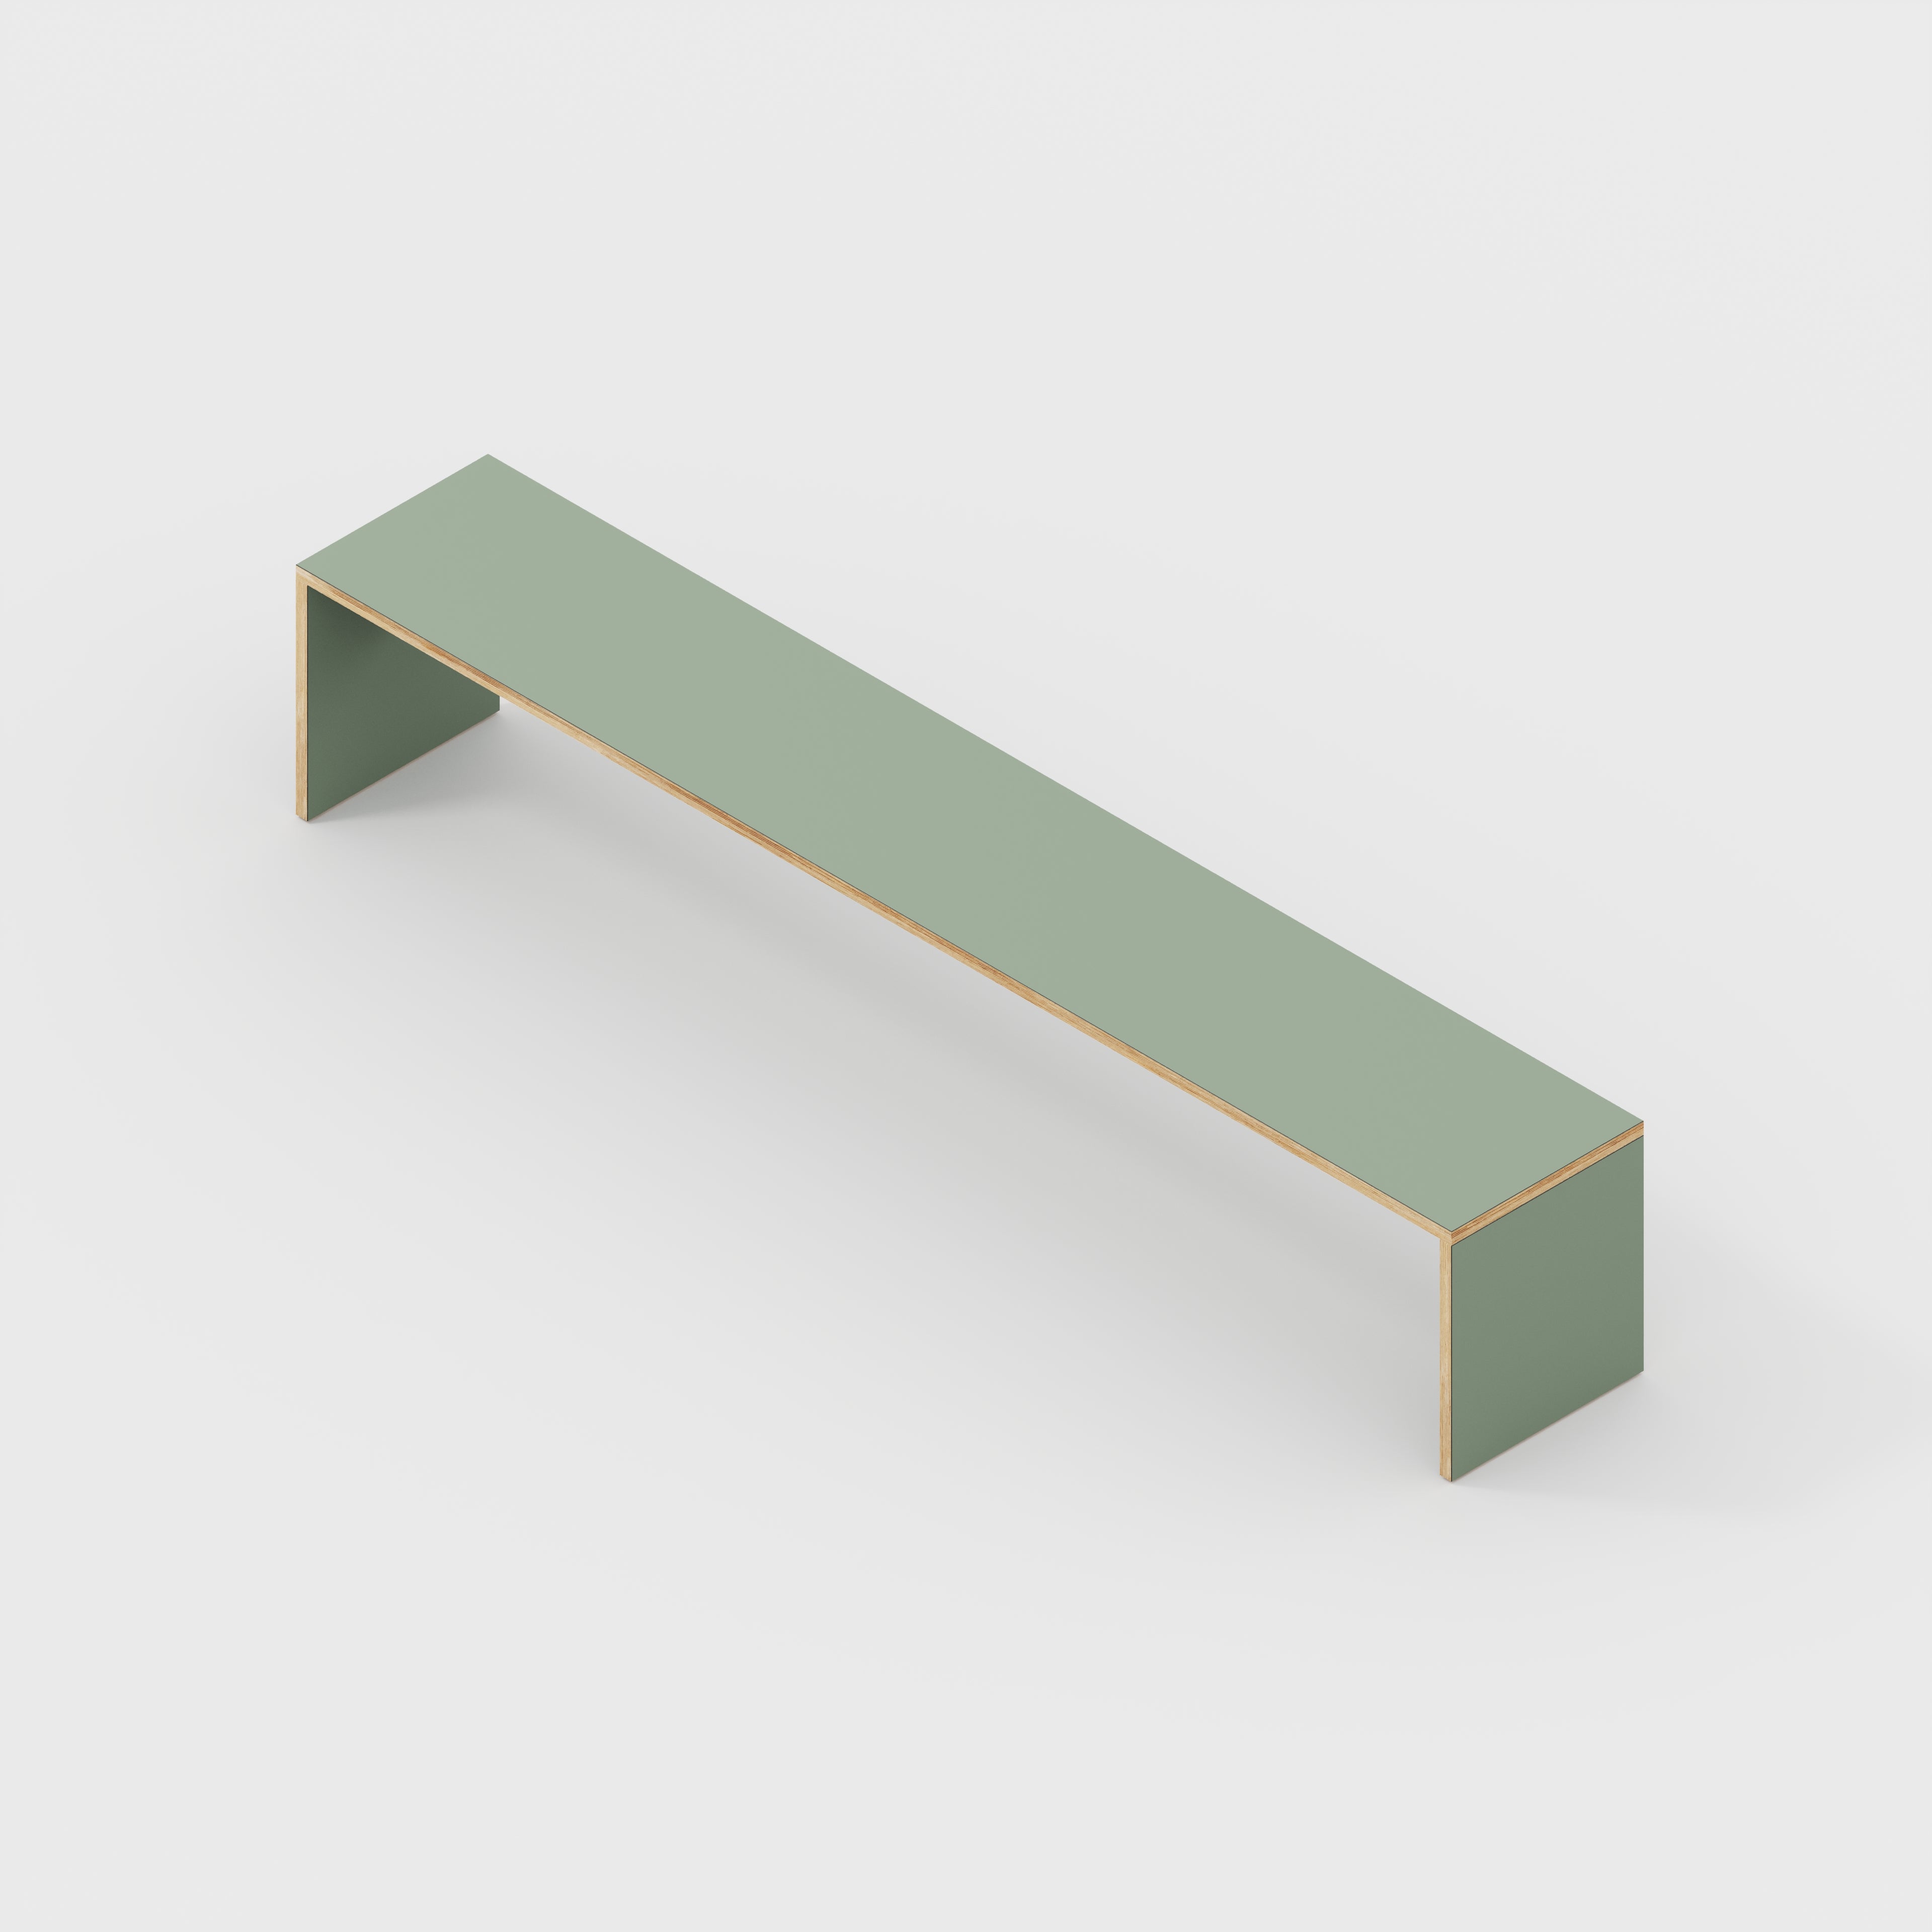 Bench Seat with Solid Sides - Formica Green Slate - 2400(w) x 400(d)